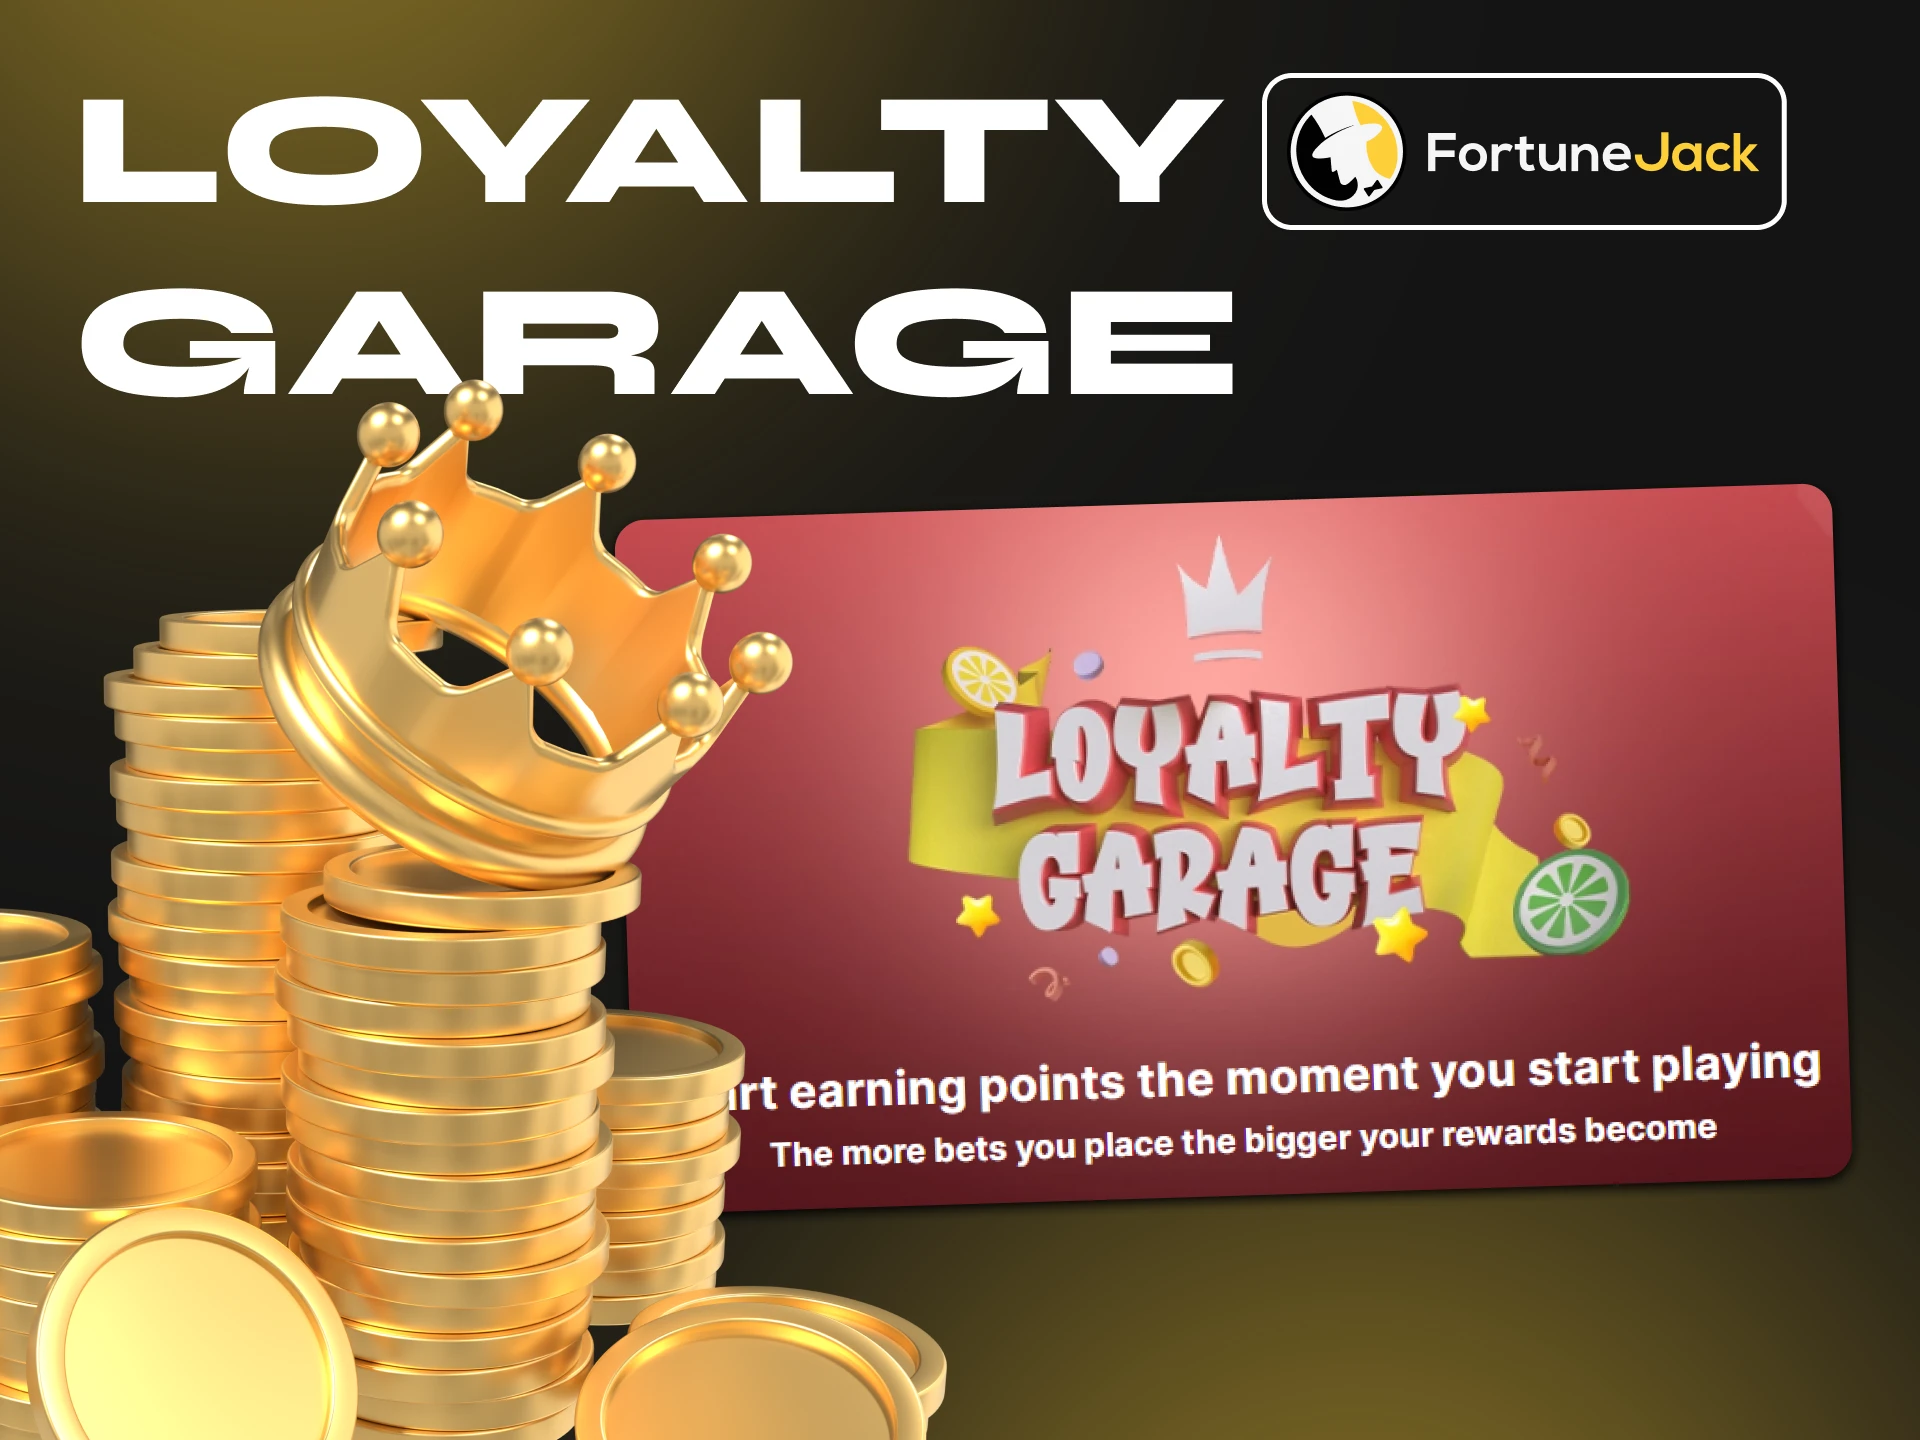 At FortuneJack Casino, thanks to garage loyalty, the more bets you place, the greater your rewards.